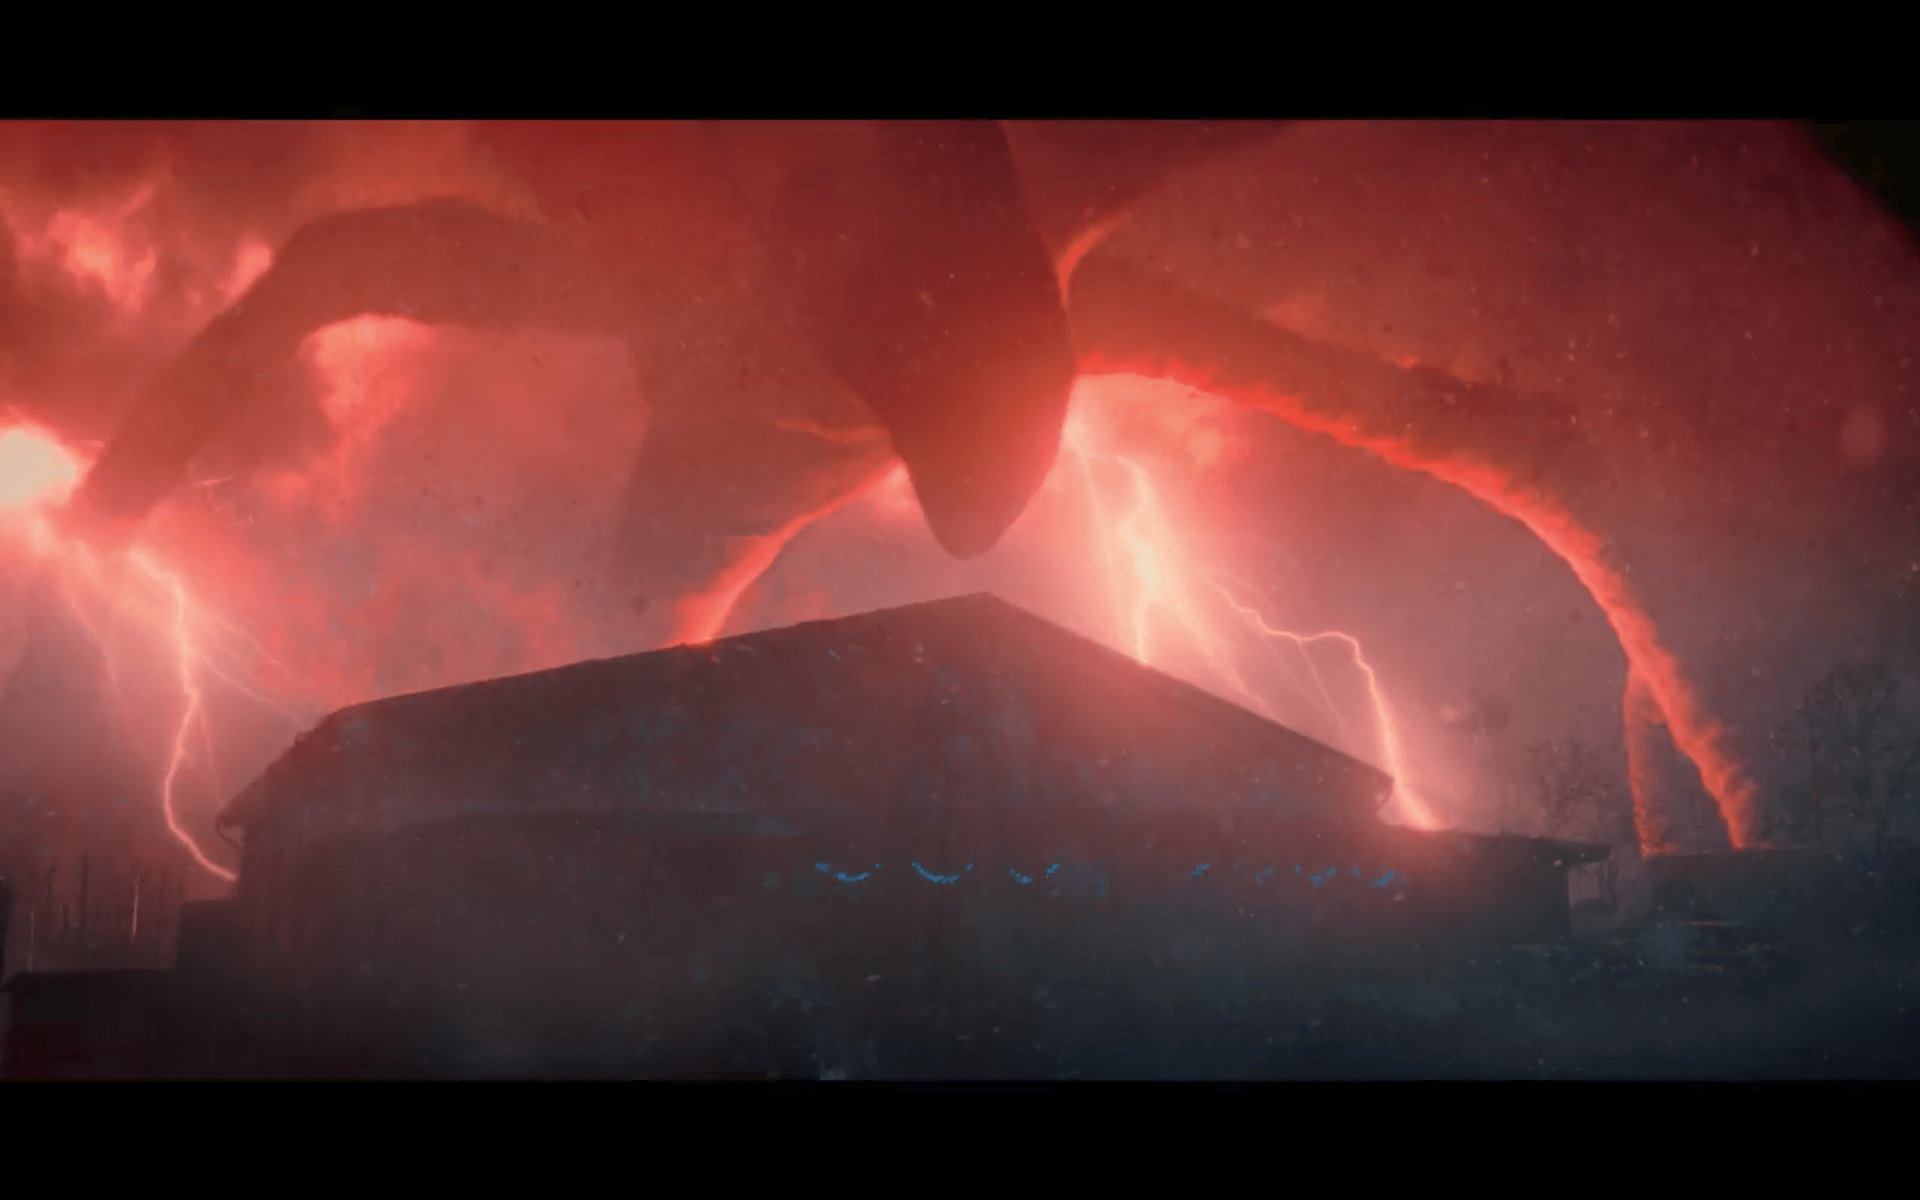 Download wallpaper city red monster nature clouds tentacle atack  section fantasy in resolution 1920x1080